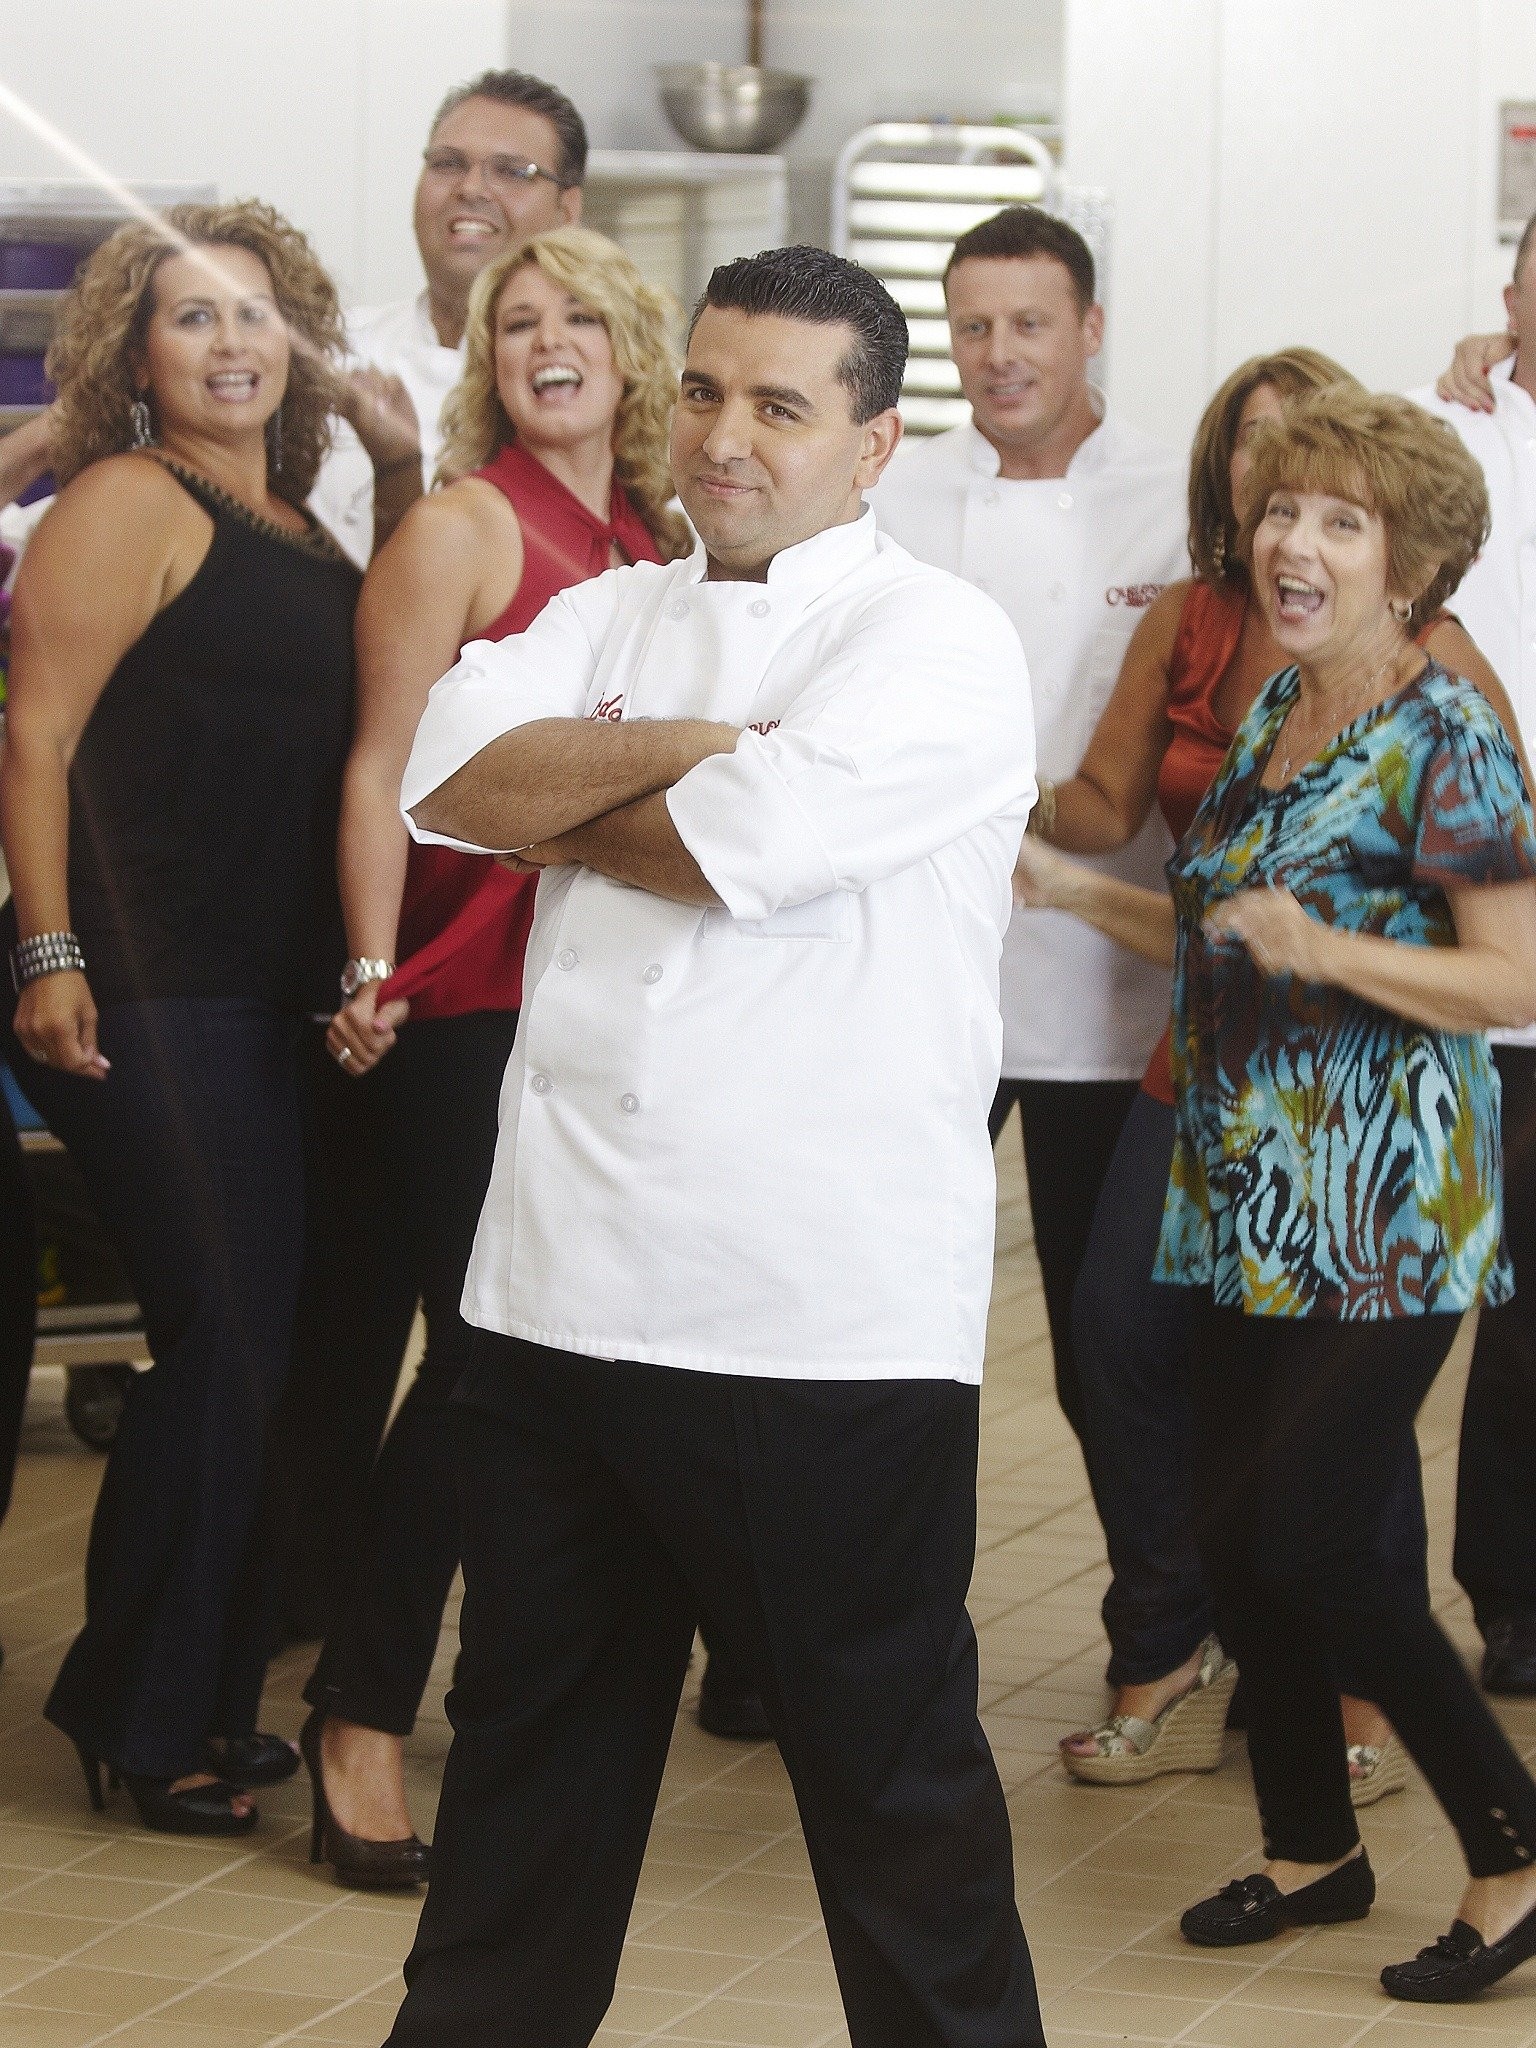 Cake Boss' Buddy Valastro takes out over $2.3M in PPP loans for his  bakeries during pandemic despite '$10M' net worth | The US Sun